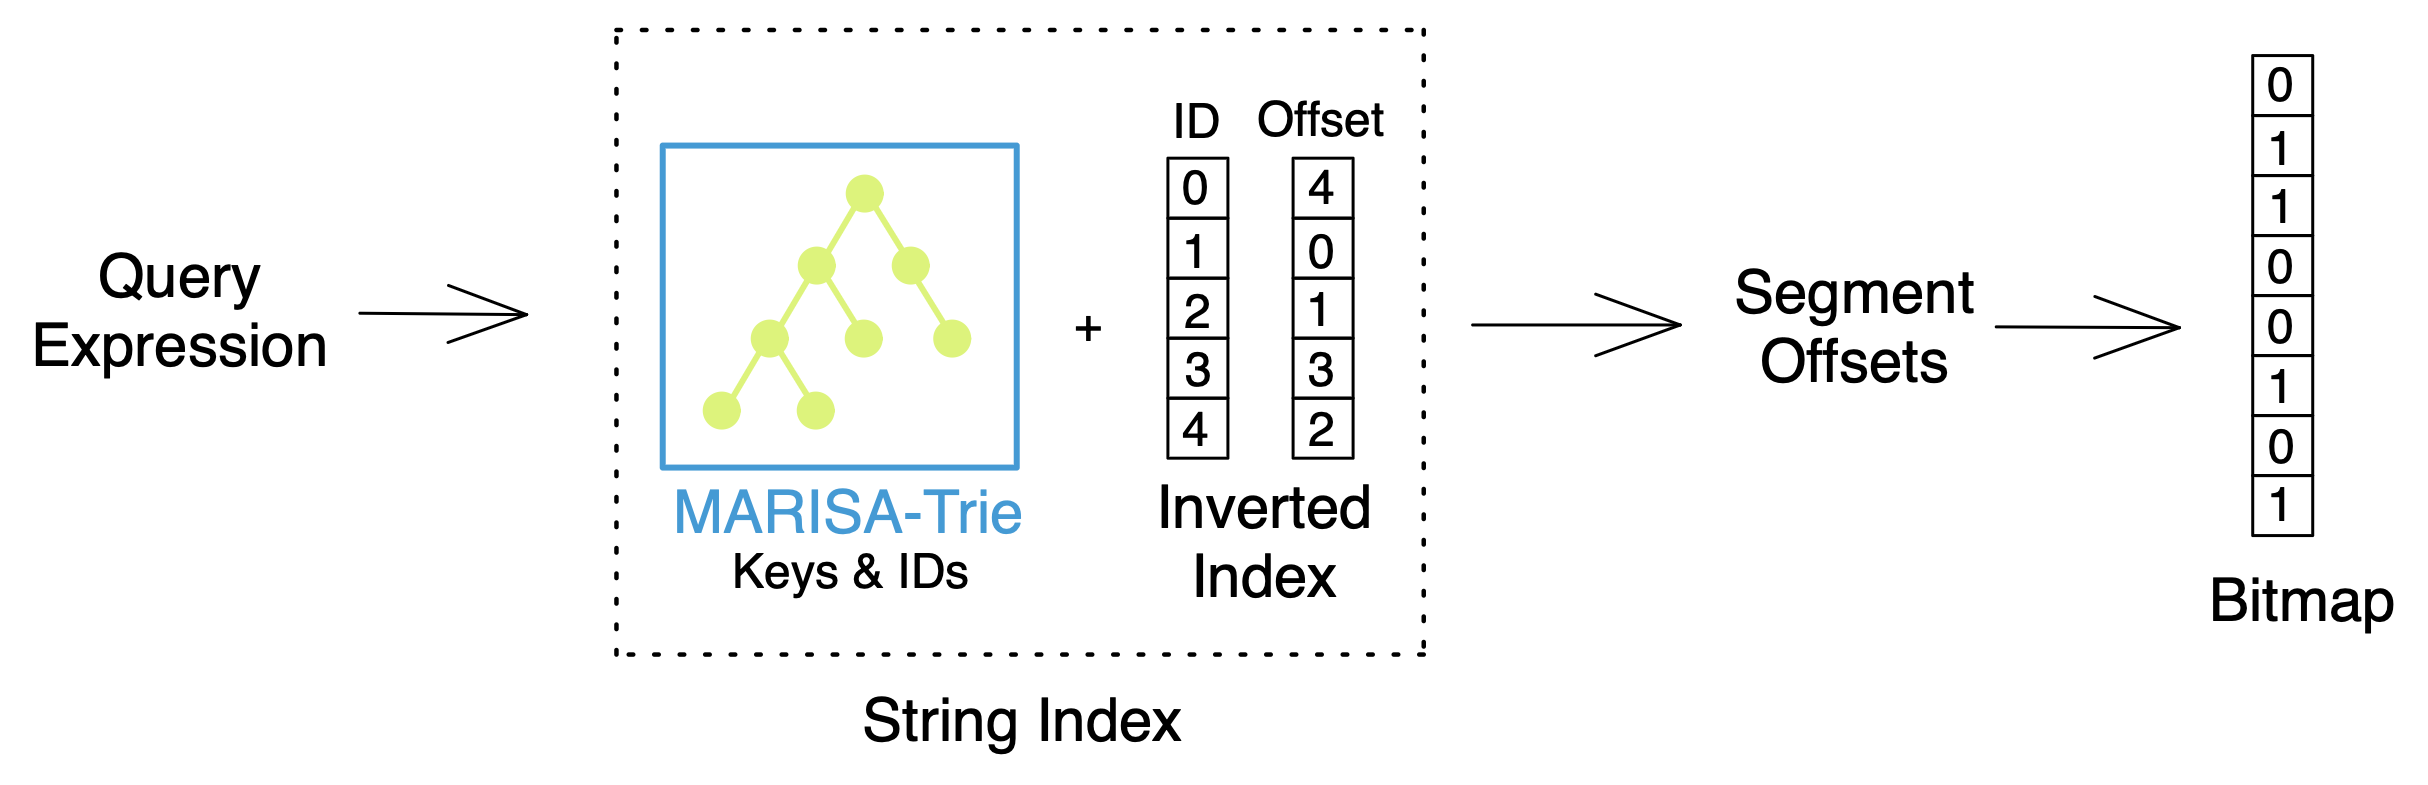 Milvus 2.1 combines MARISA-Trie with inverted index to significantly improve filtering speed.